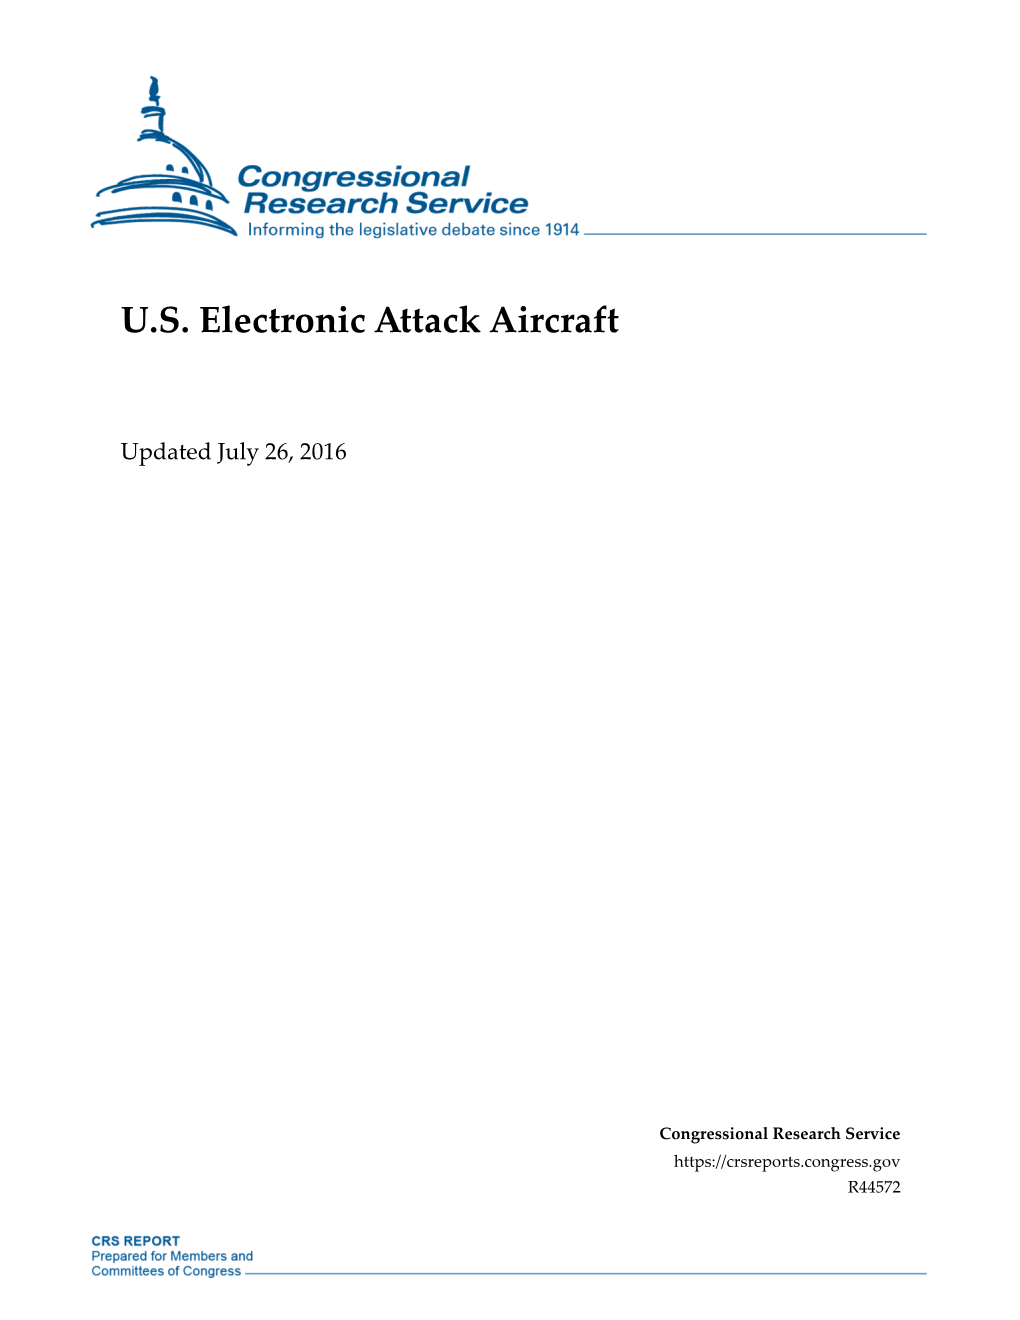 U.S. Electronic Attack Aircraft